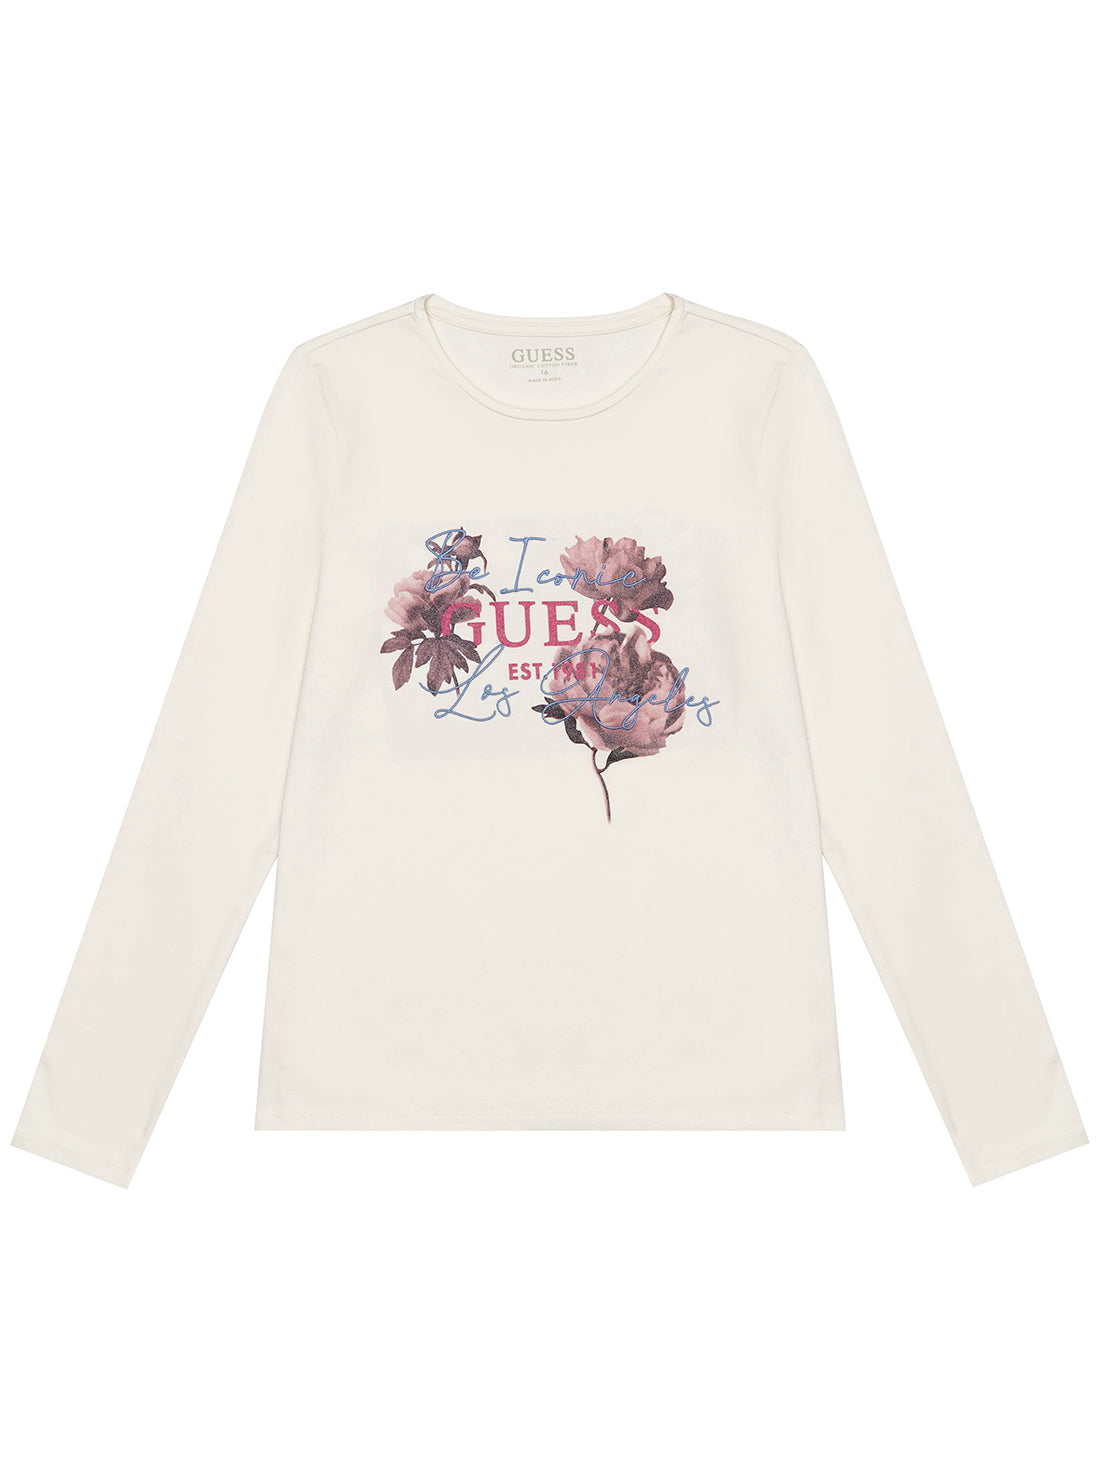 GUESS White Long Sleeve T-Shirt (7-16) front view